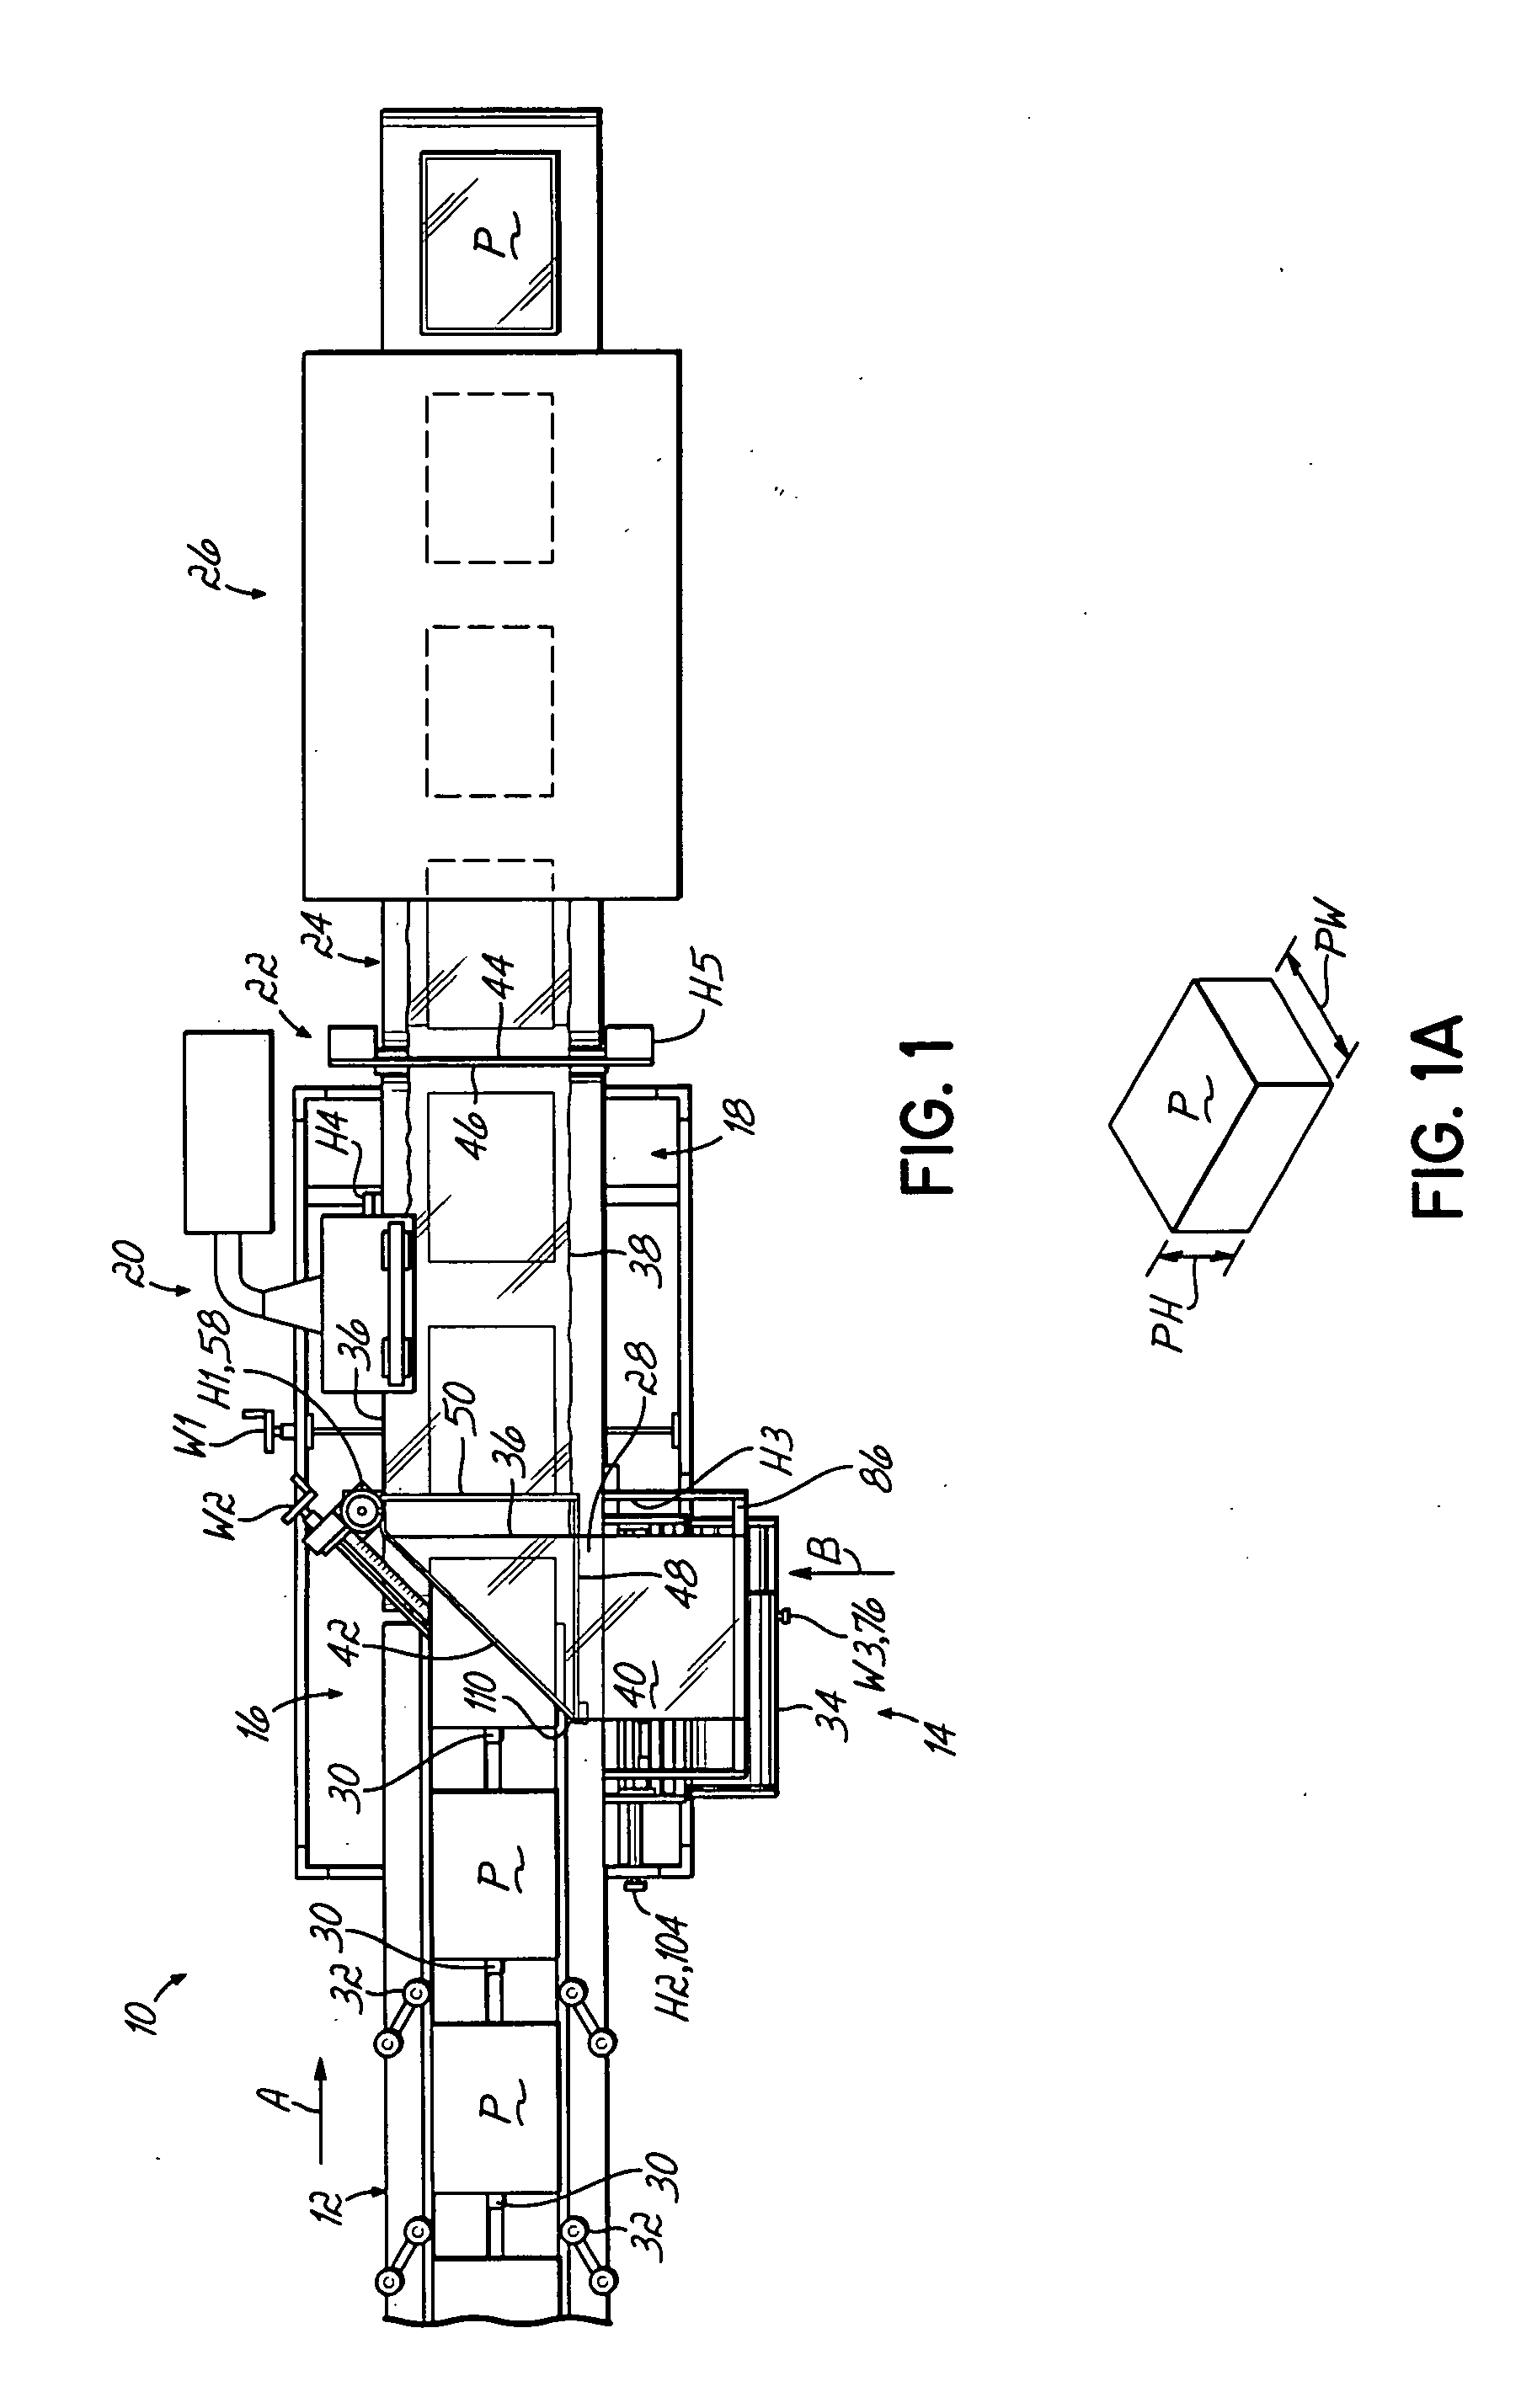 Calibrated shrink wrap packaging system and associated method